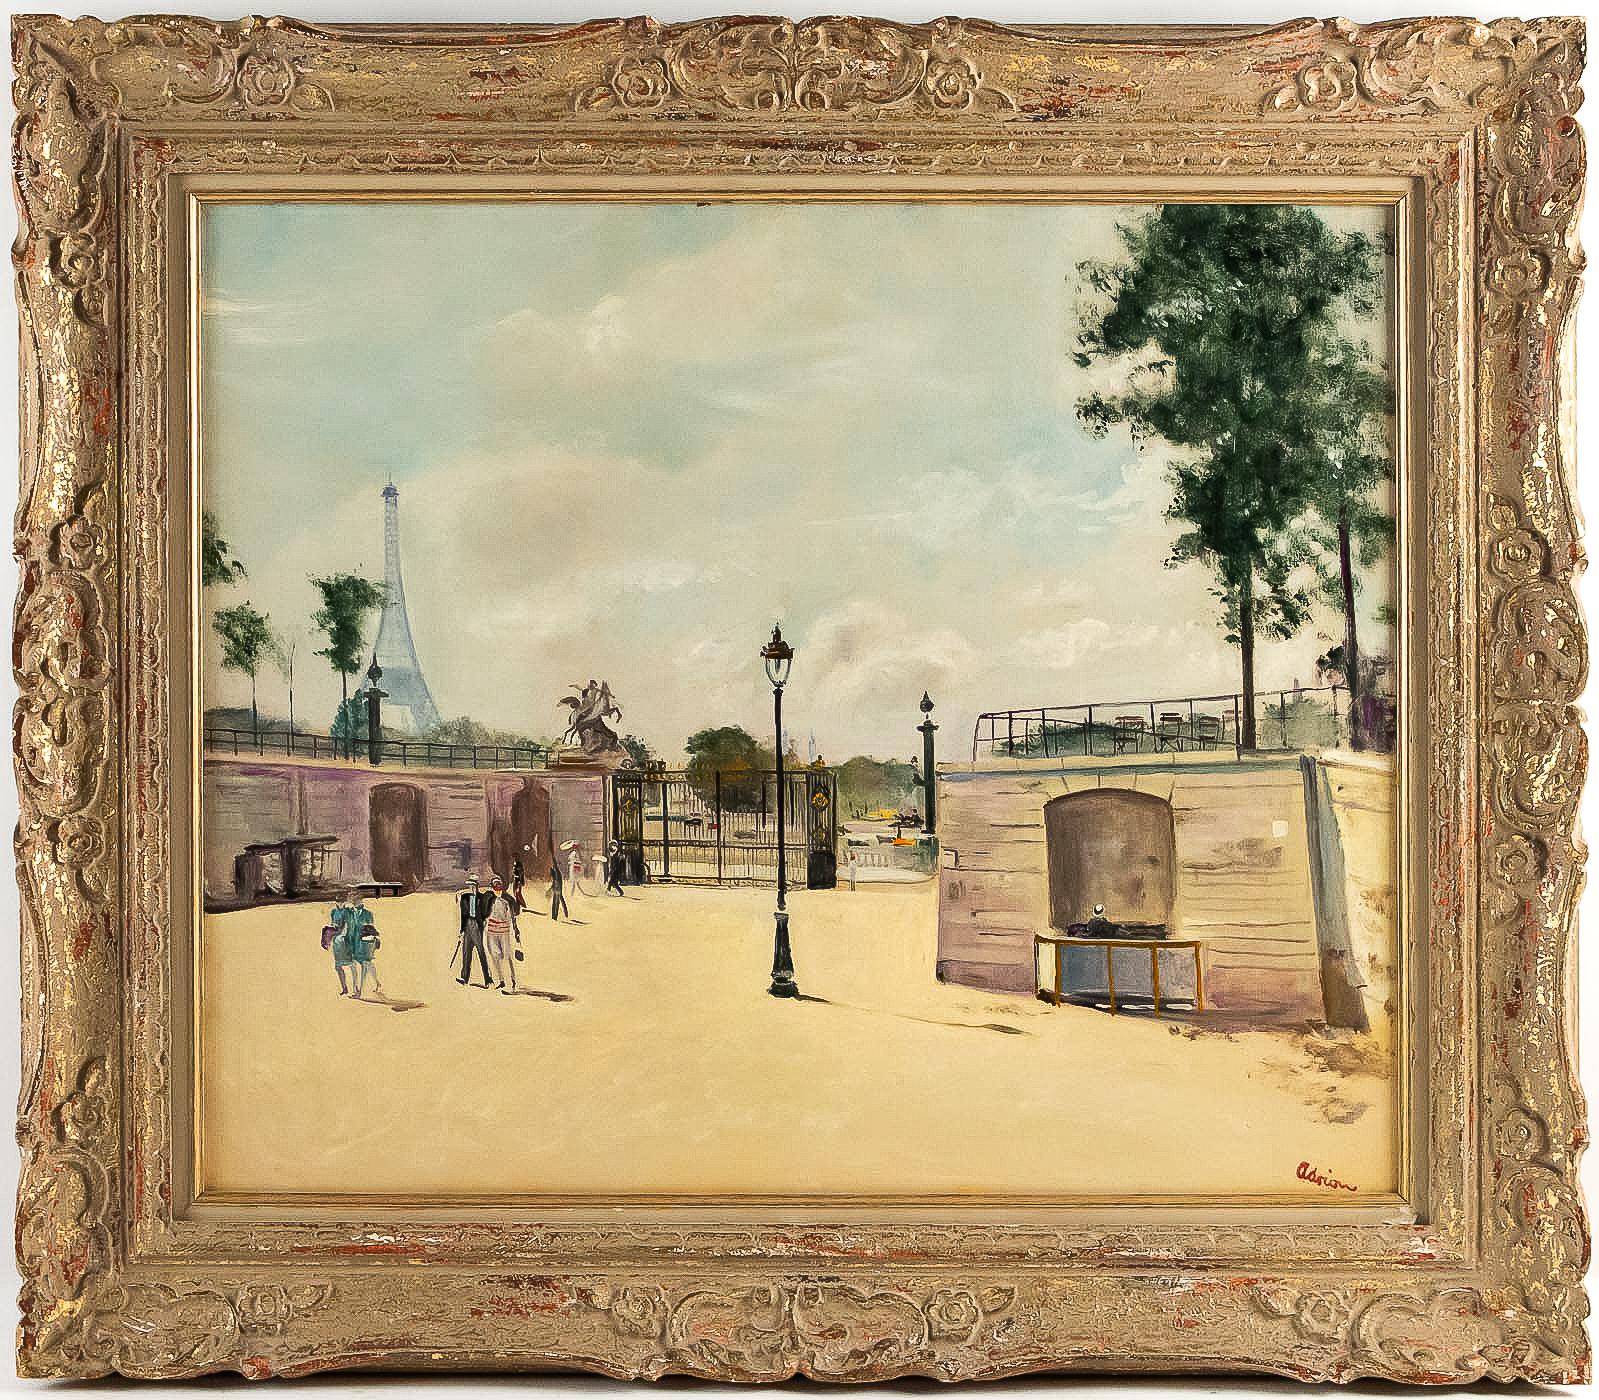 Lucien Adrion oil on canvas Tuileries view in the 1930s, Paris.

We present you a gorgeous painting by this exciting painter who Lucien Adrion.

A beautiful and decorative, full of life and light oil on canvas, depicting a lovely Tuileries view,